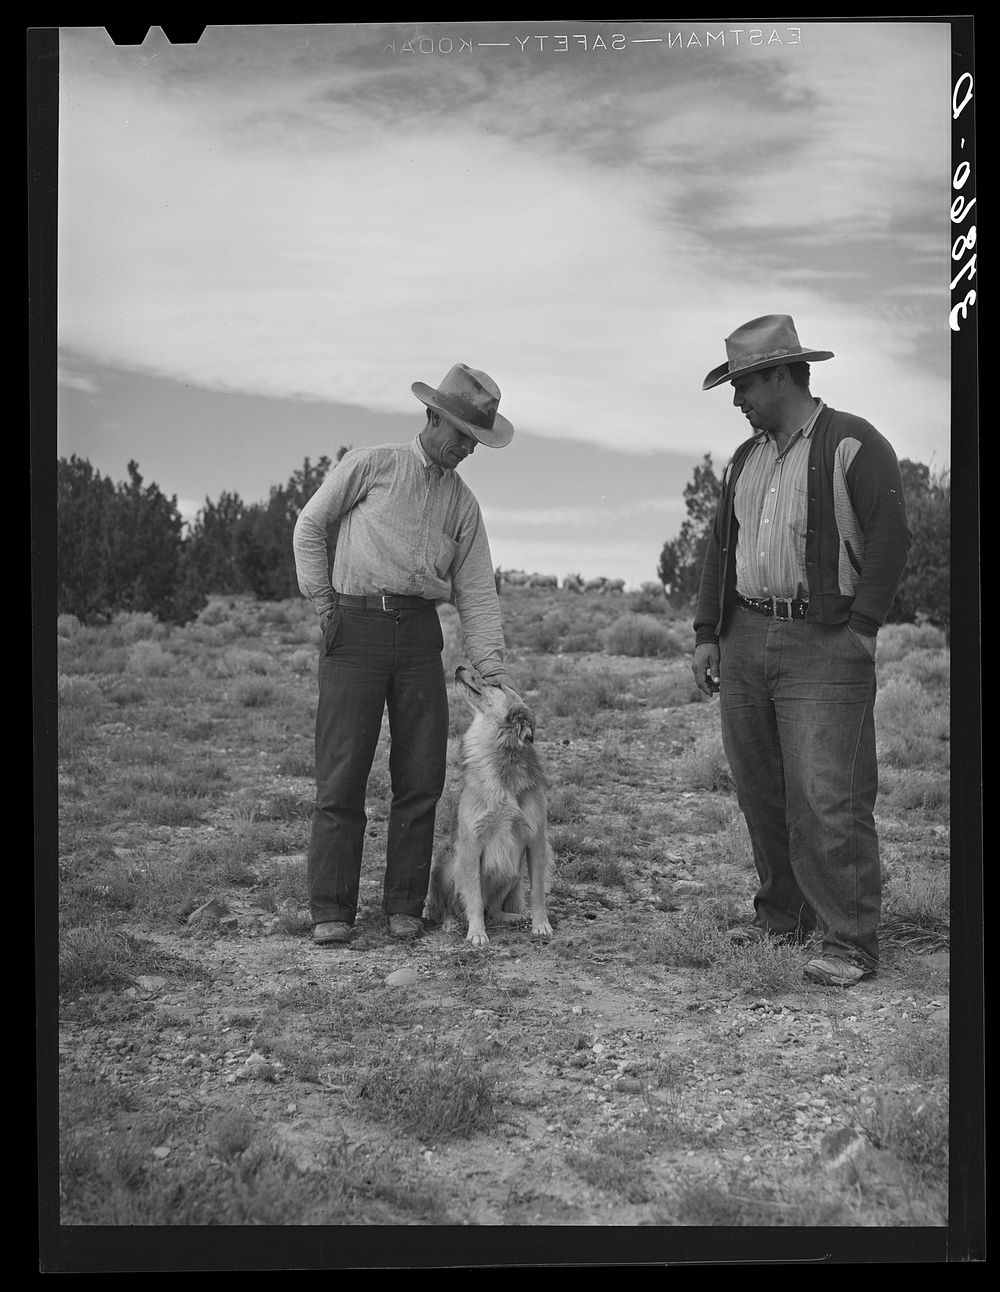 Sheepherders of the Candelaria brothers. Concho, Arizona by Russell Lee